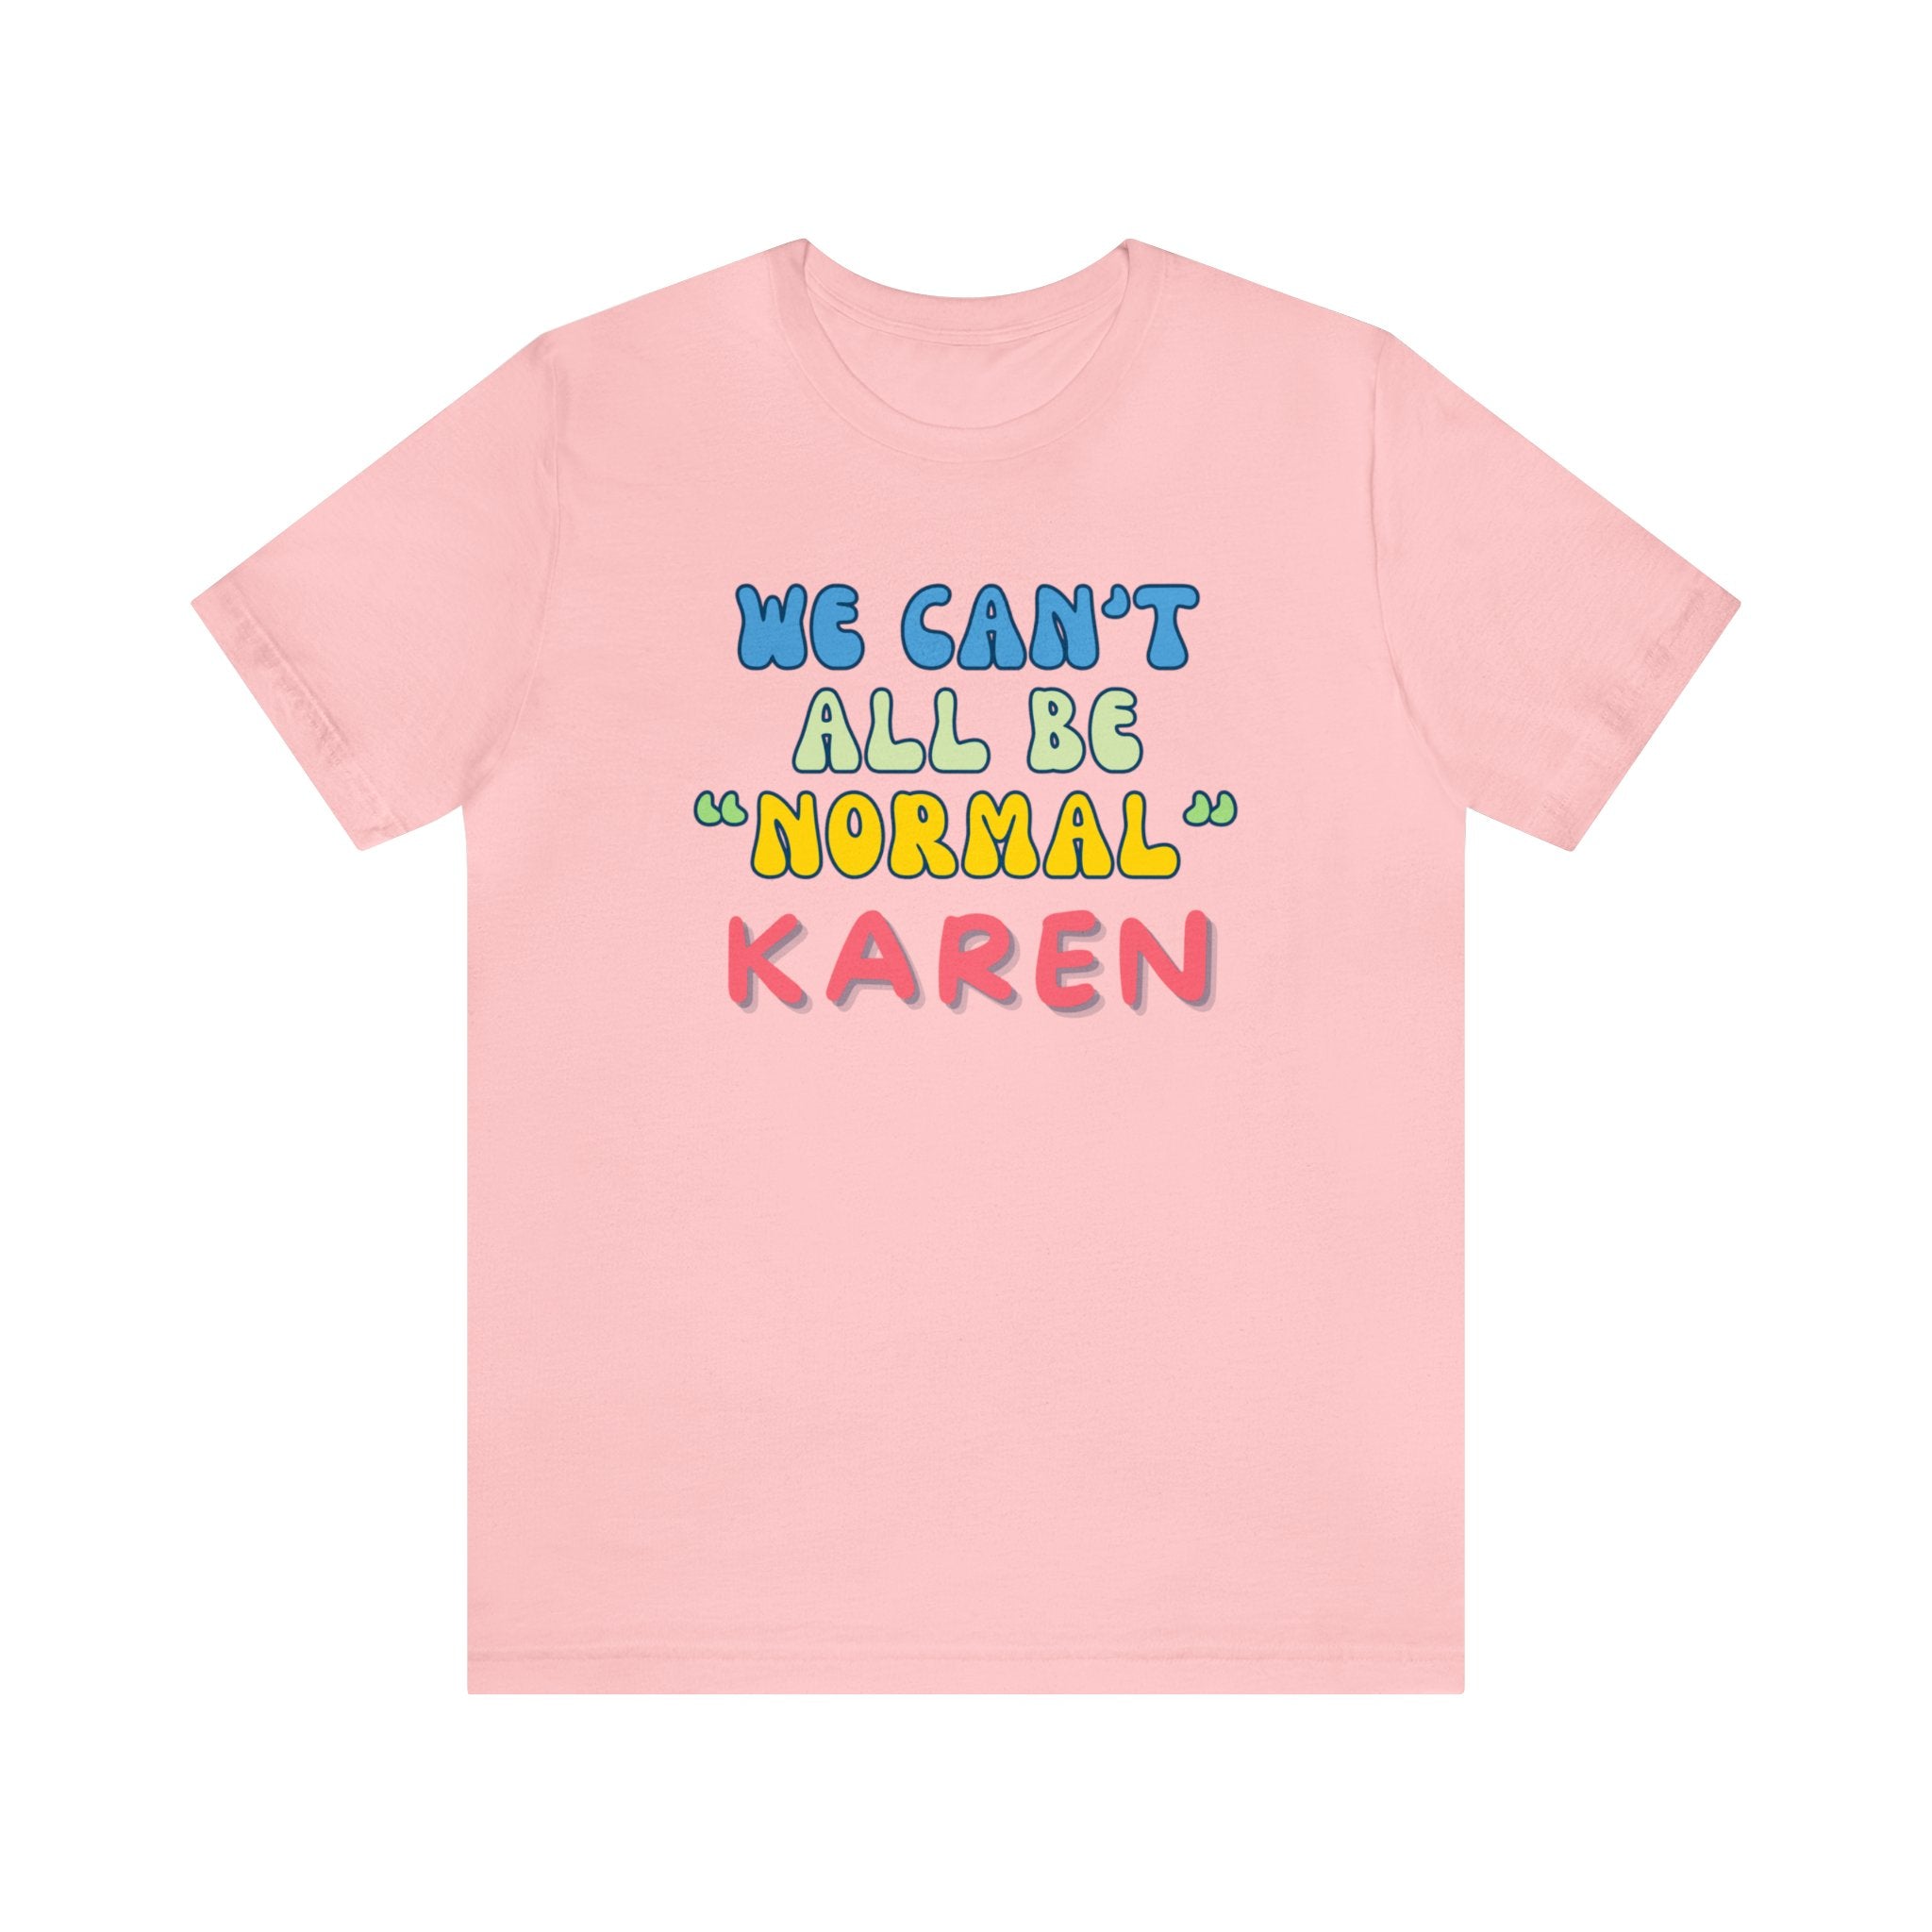 We Can't All Be Normal, Karen! : Unisex 100% Comfy Cotton, T-Shirt by Bella+Canvas